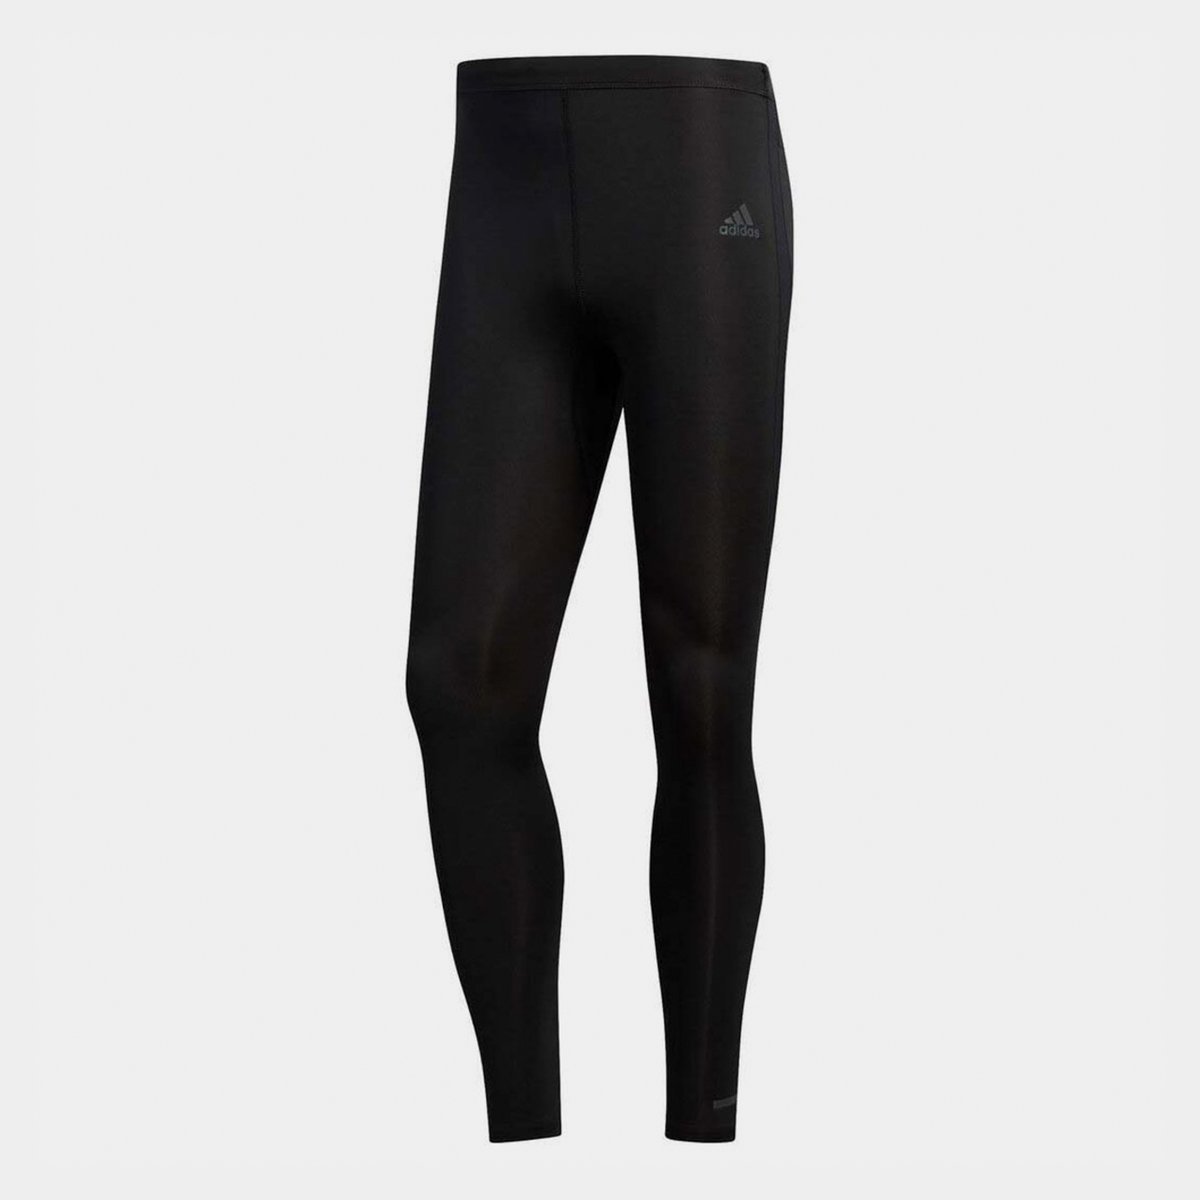 adidas Men's Own The Run Tights Large Black/Reflective Silver